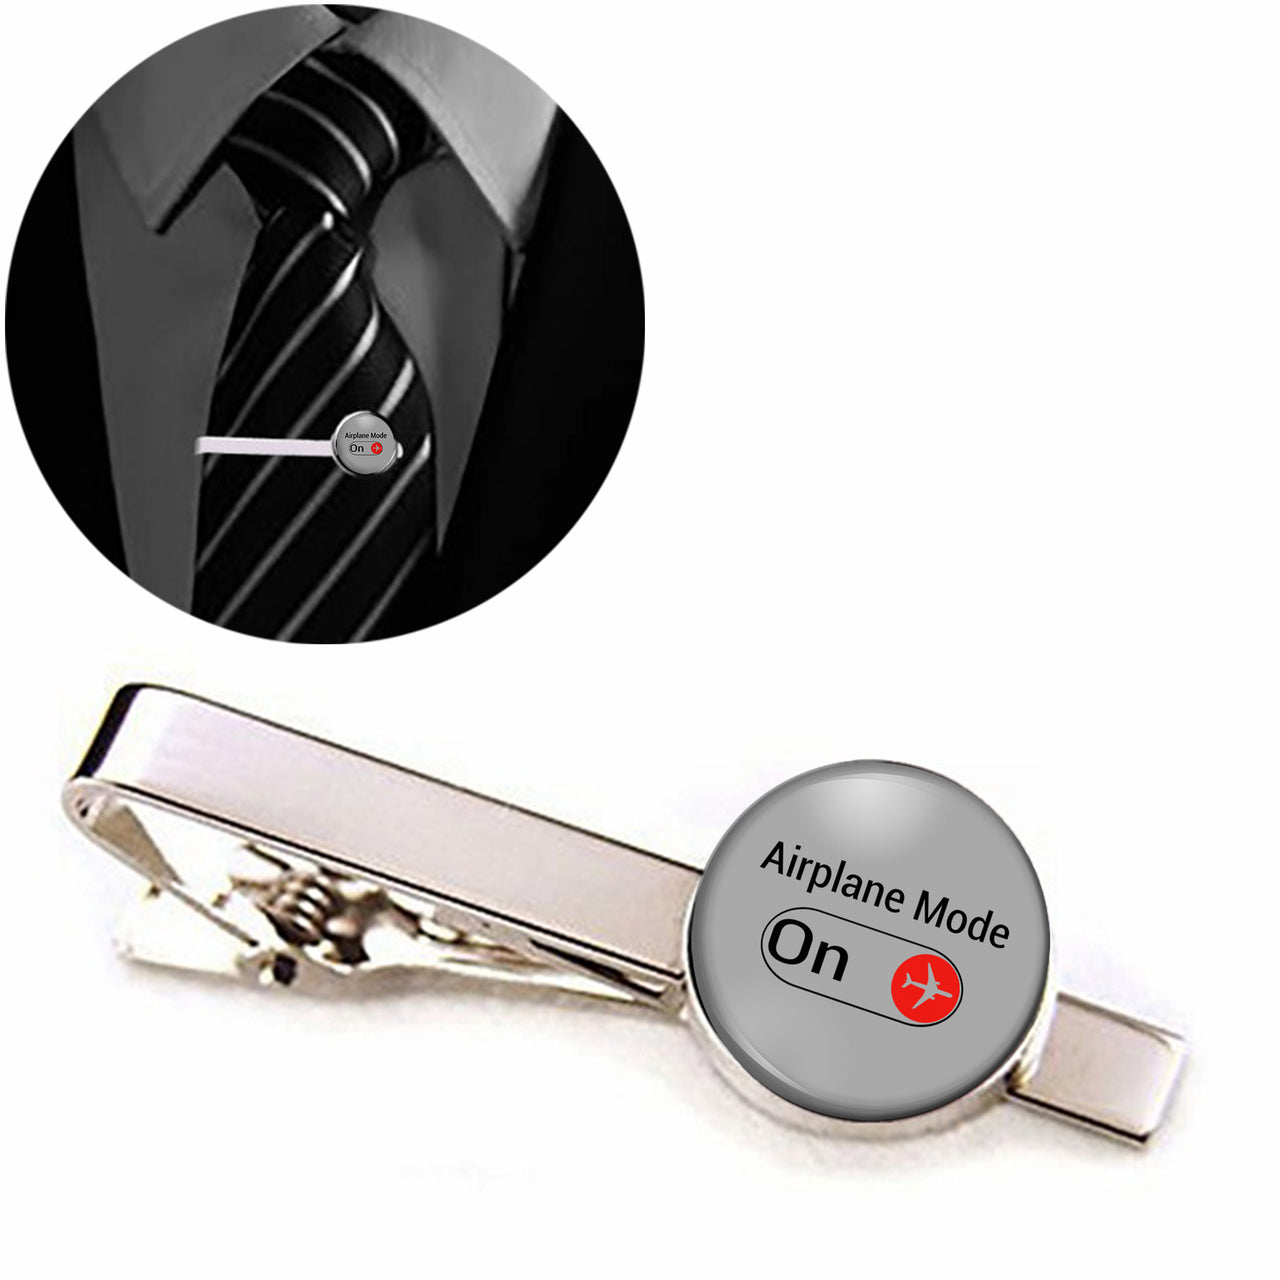 Airplane Mode On Designed Tie Clips